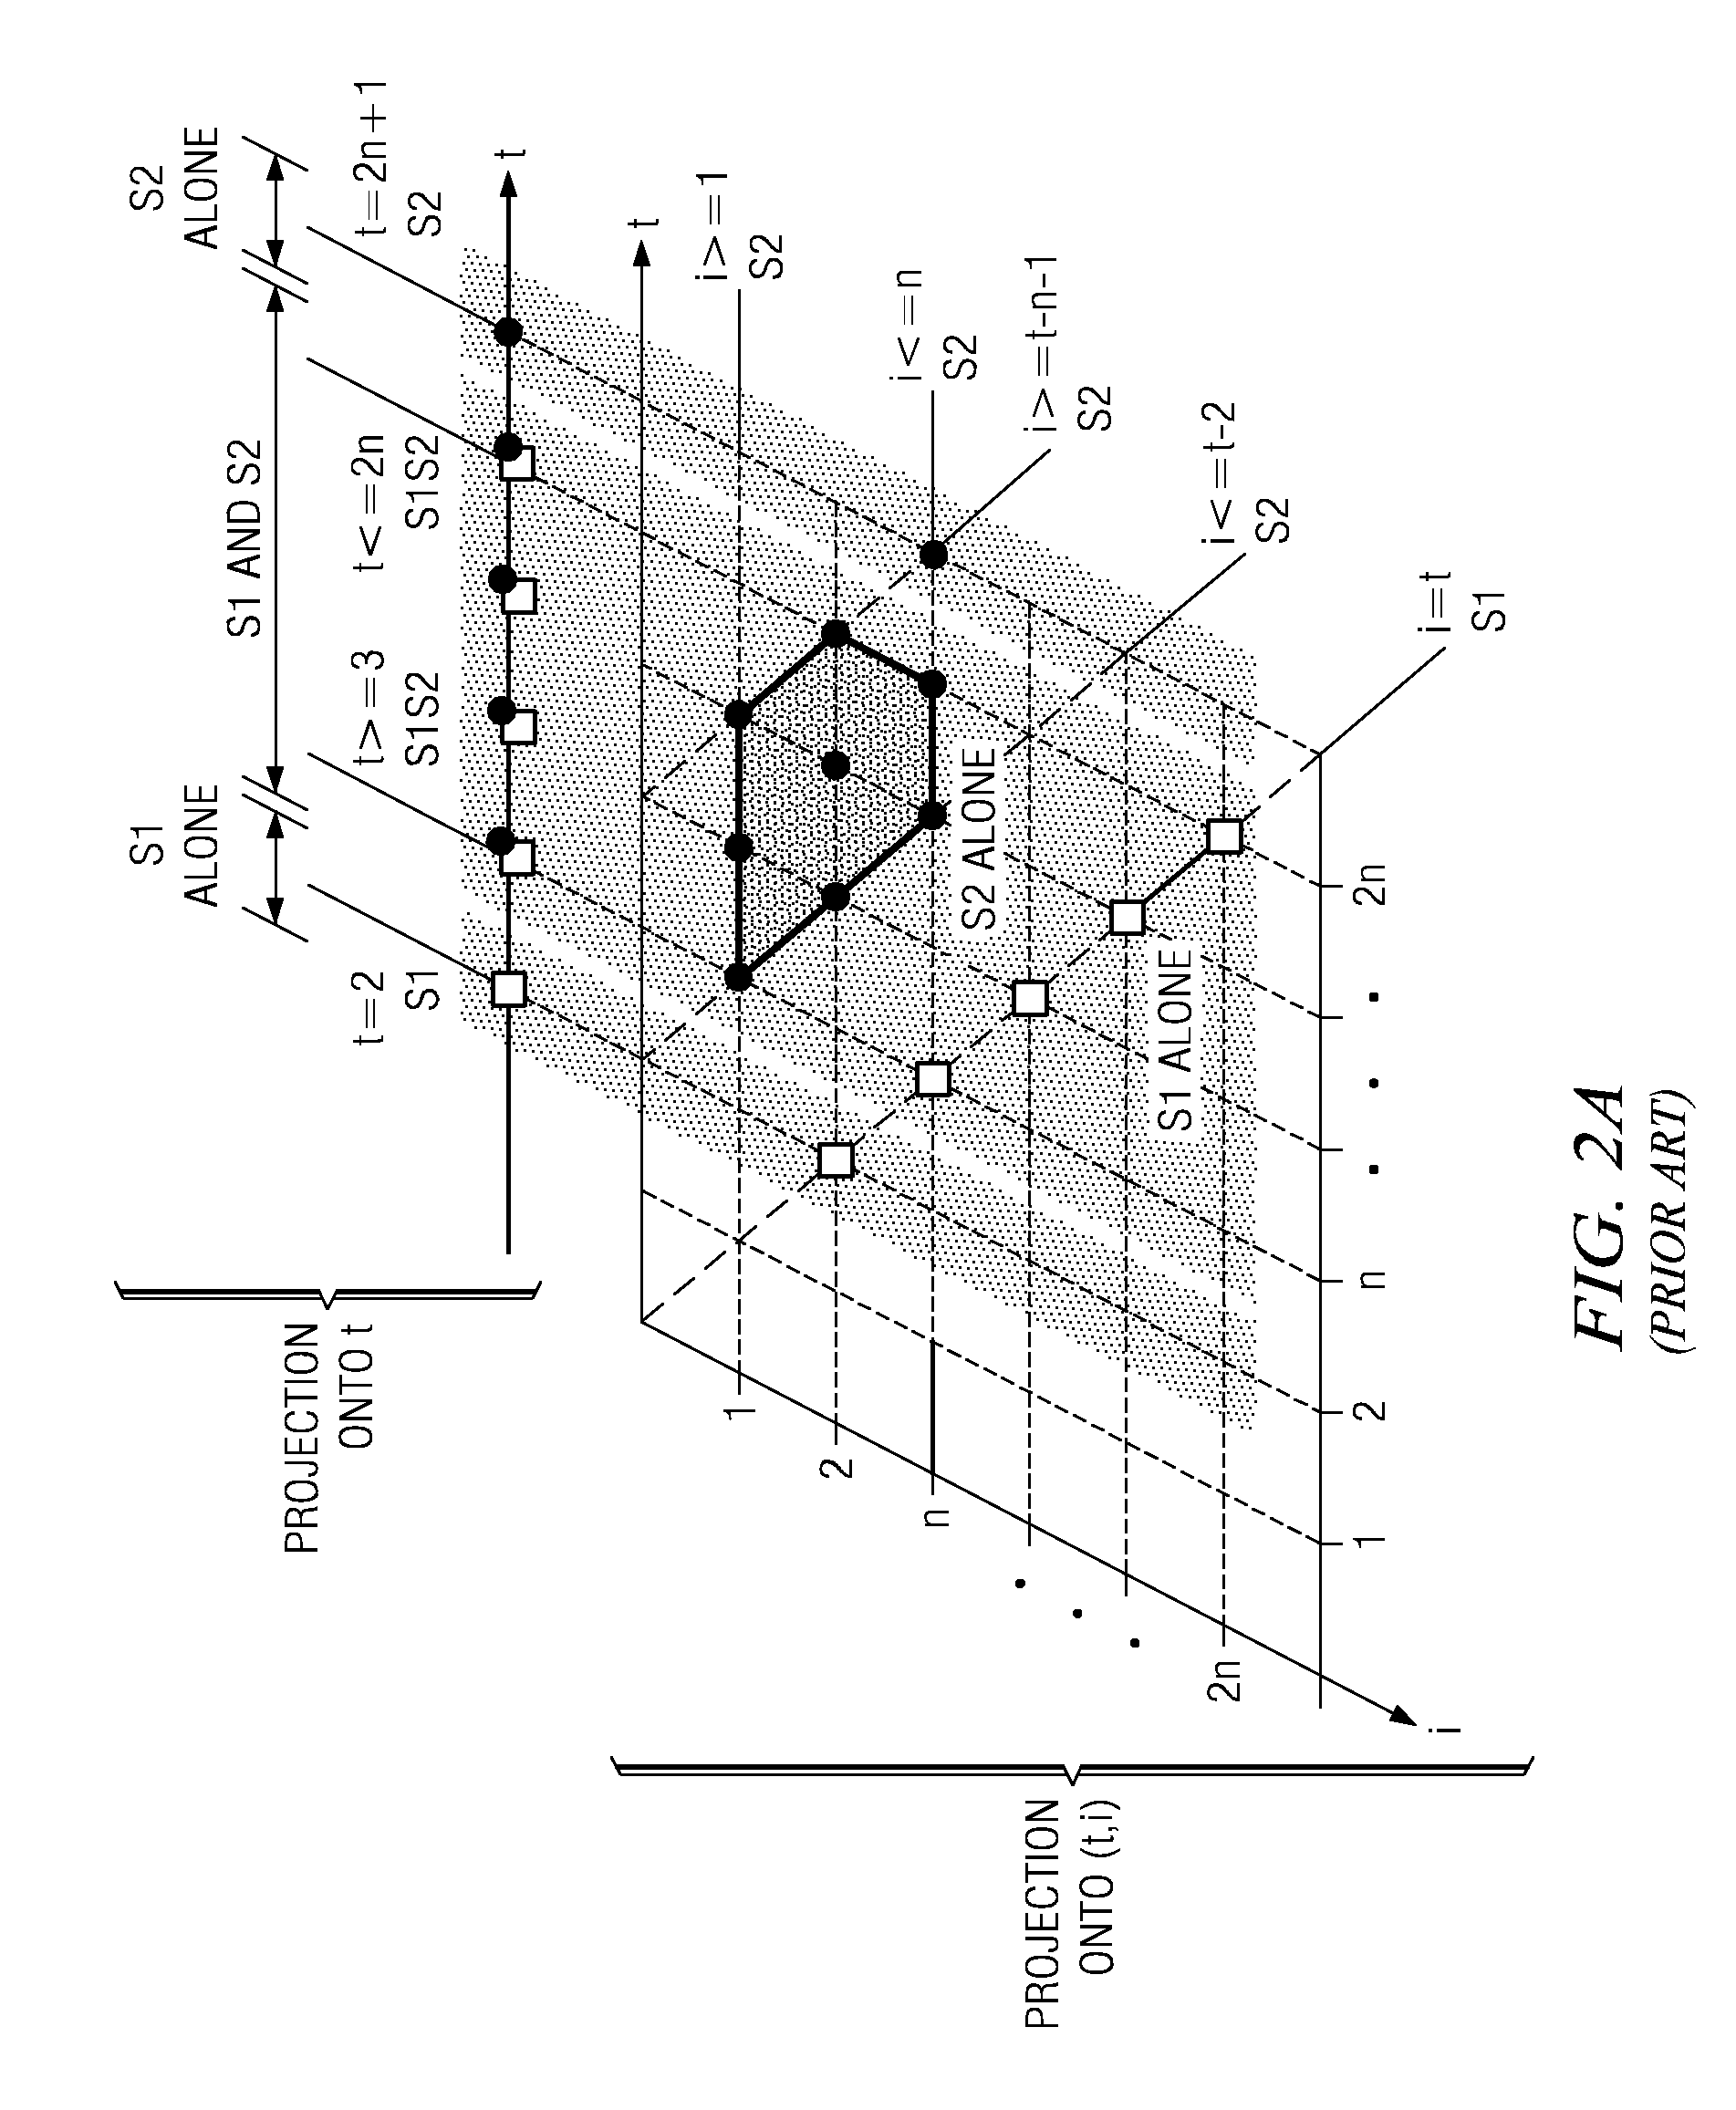 System and Method for Advanced Polyhedral Loop Transformations of Source Code in a Compiler